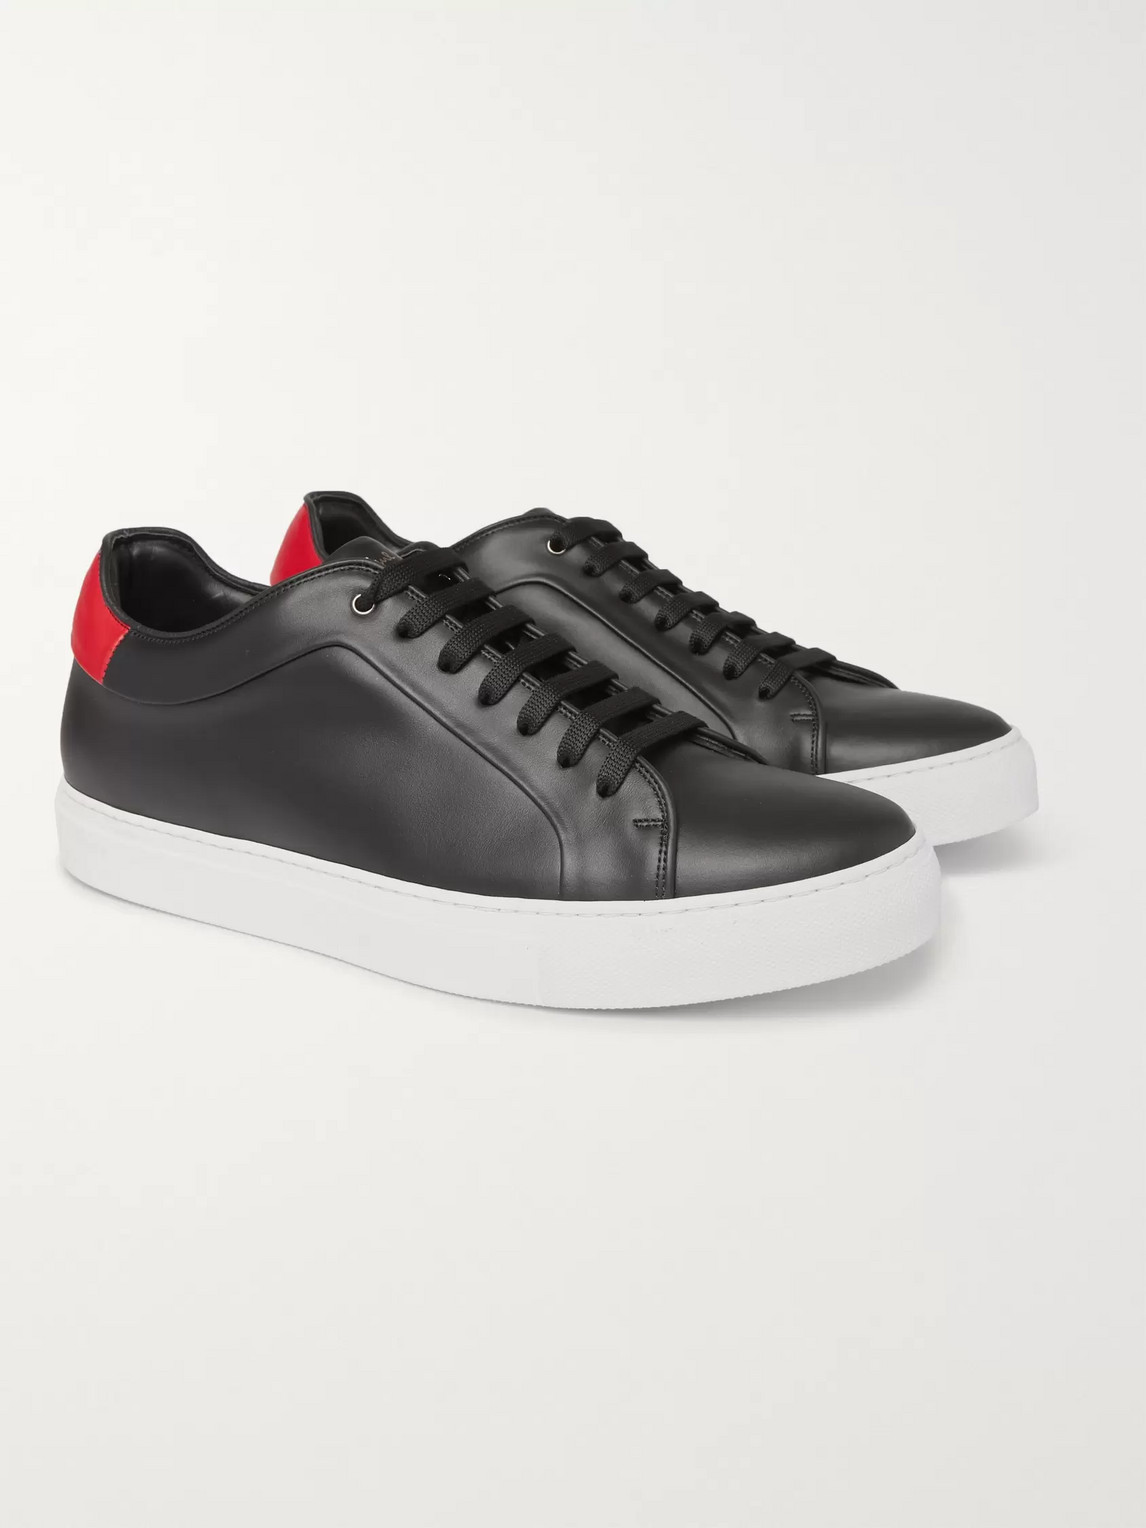 PAUL SMITH BASSO LEATHER SNEAKERS